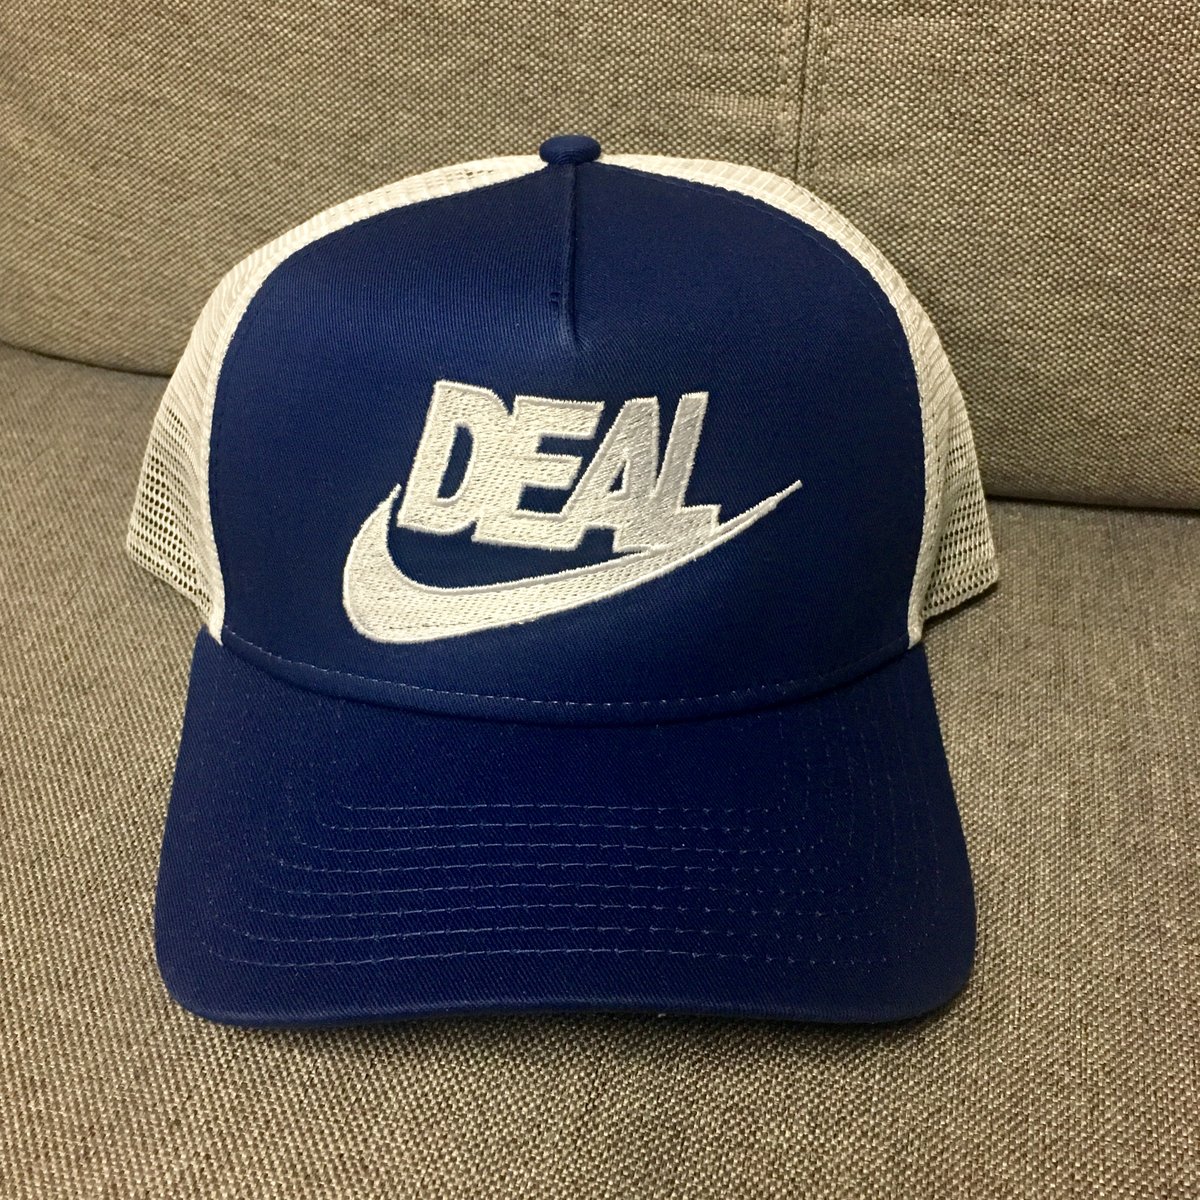 Deal Embroidered Snapback Trucker Cap!